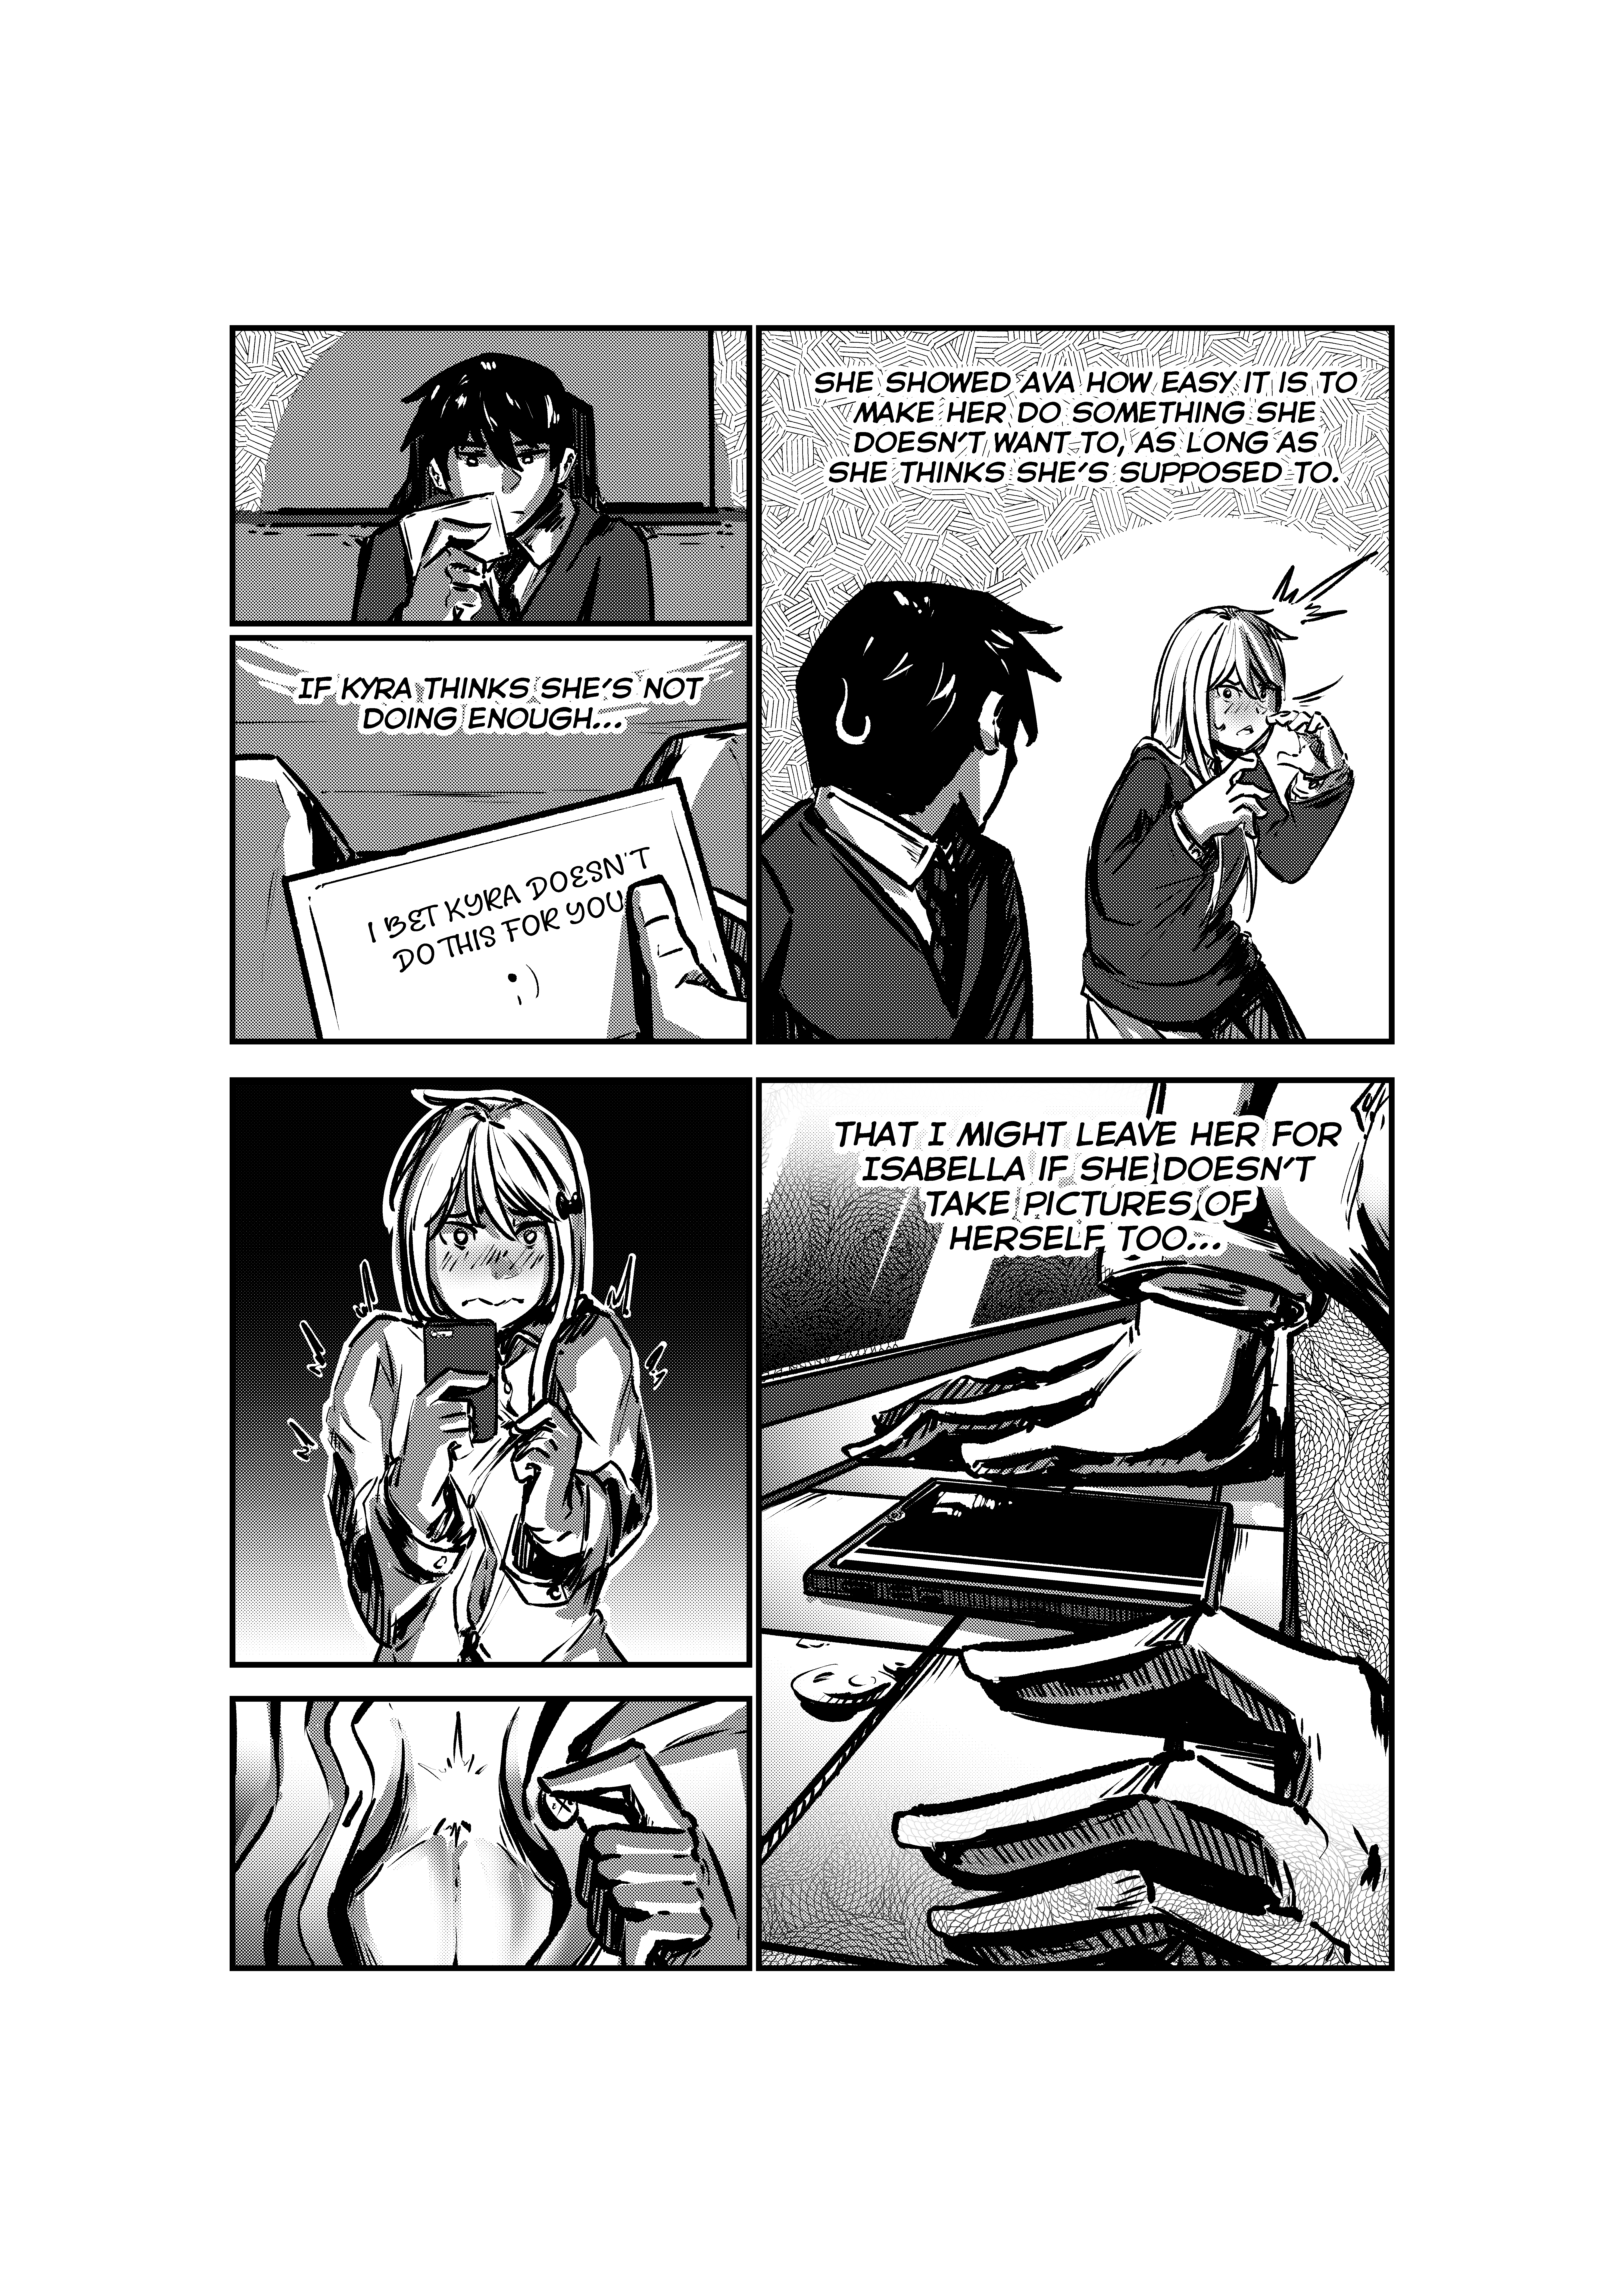 Opposites In Disguise - 11 page 33